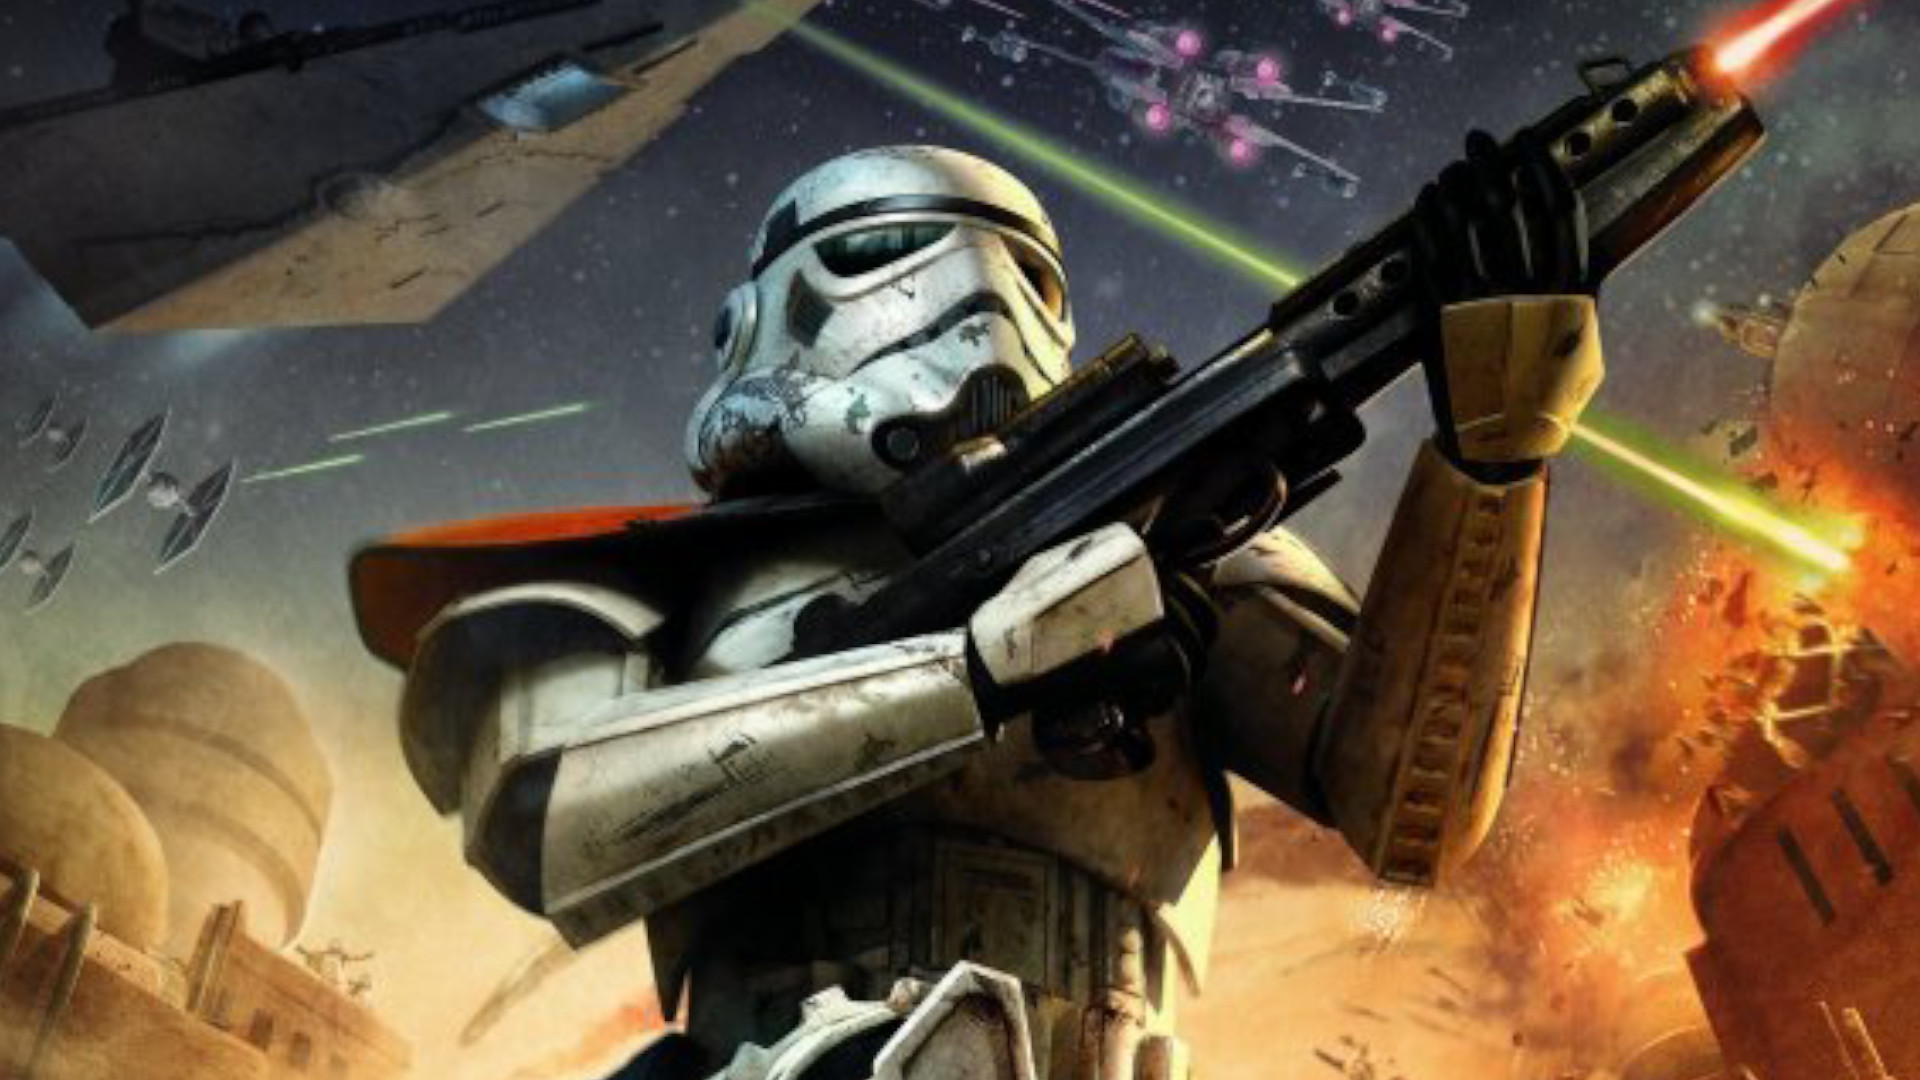 Star Wars Battlefront 3 leaks on Steam, is totally fake